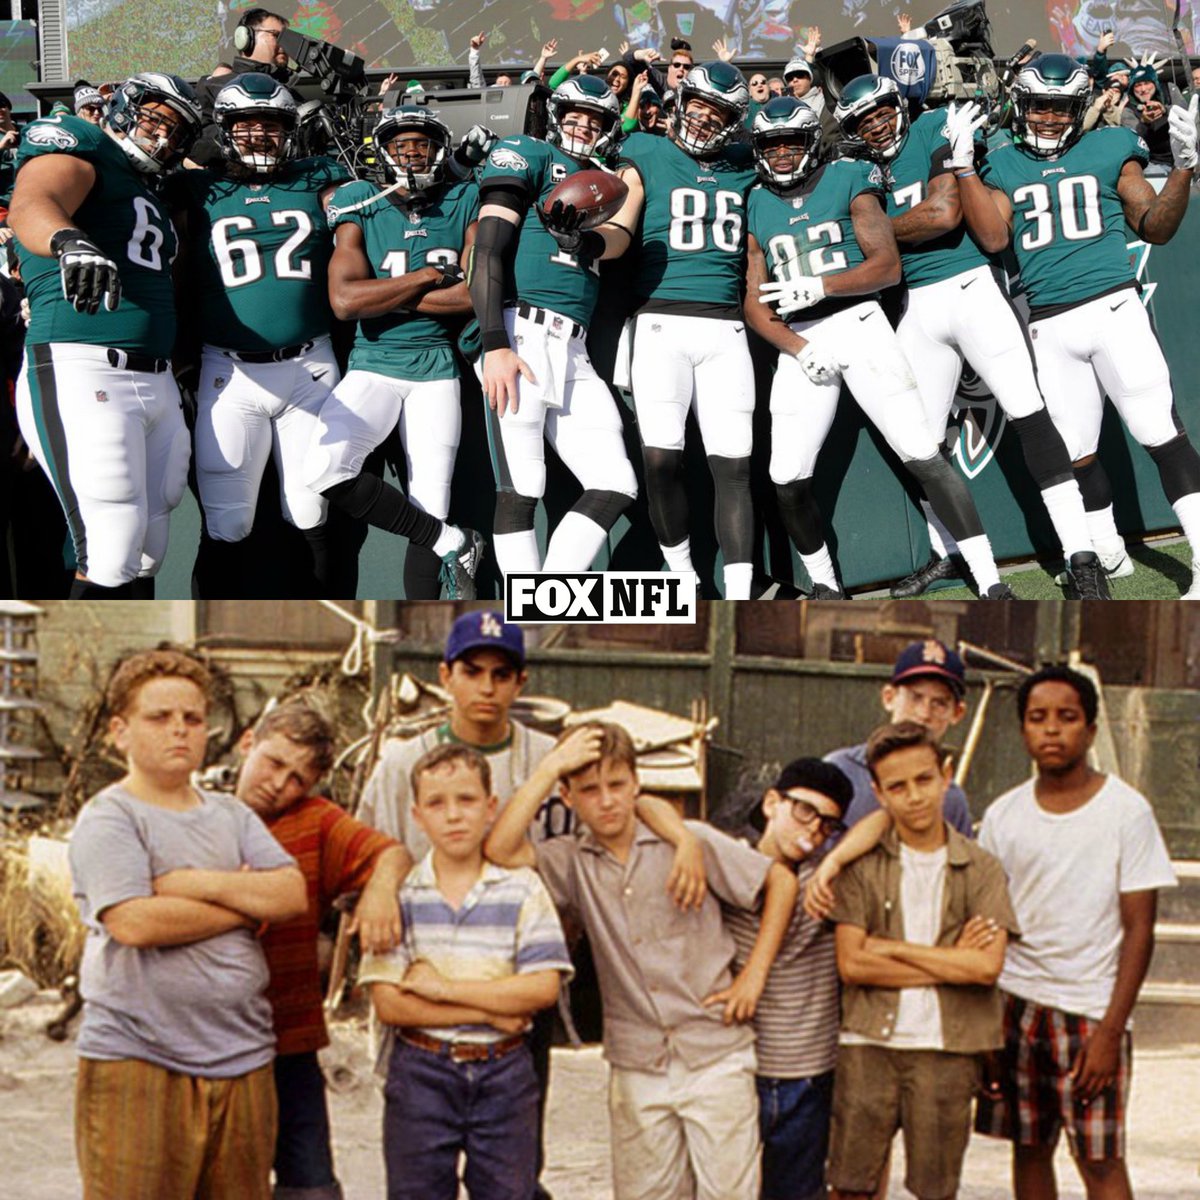 You're killing me Smalls!"The Sandlot" was released 25 years...